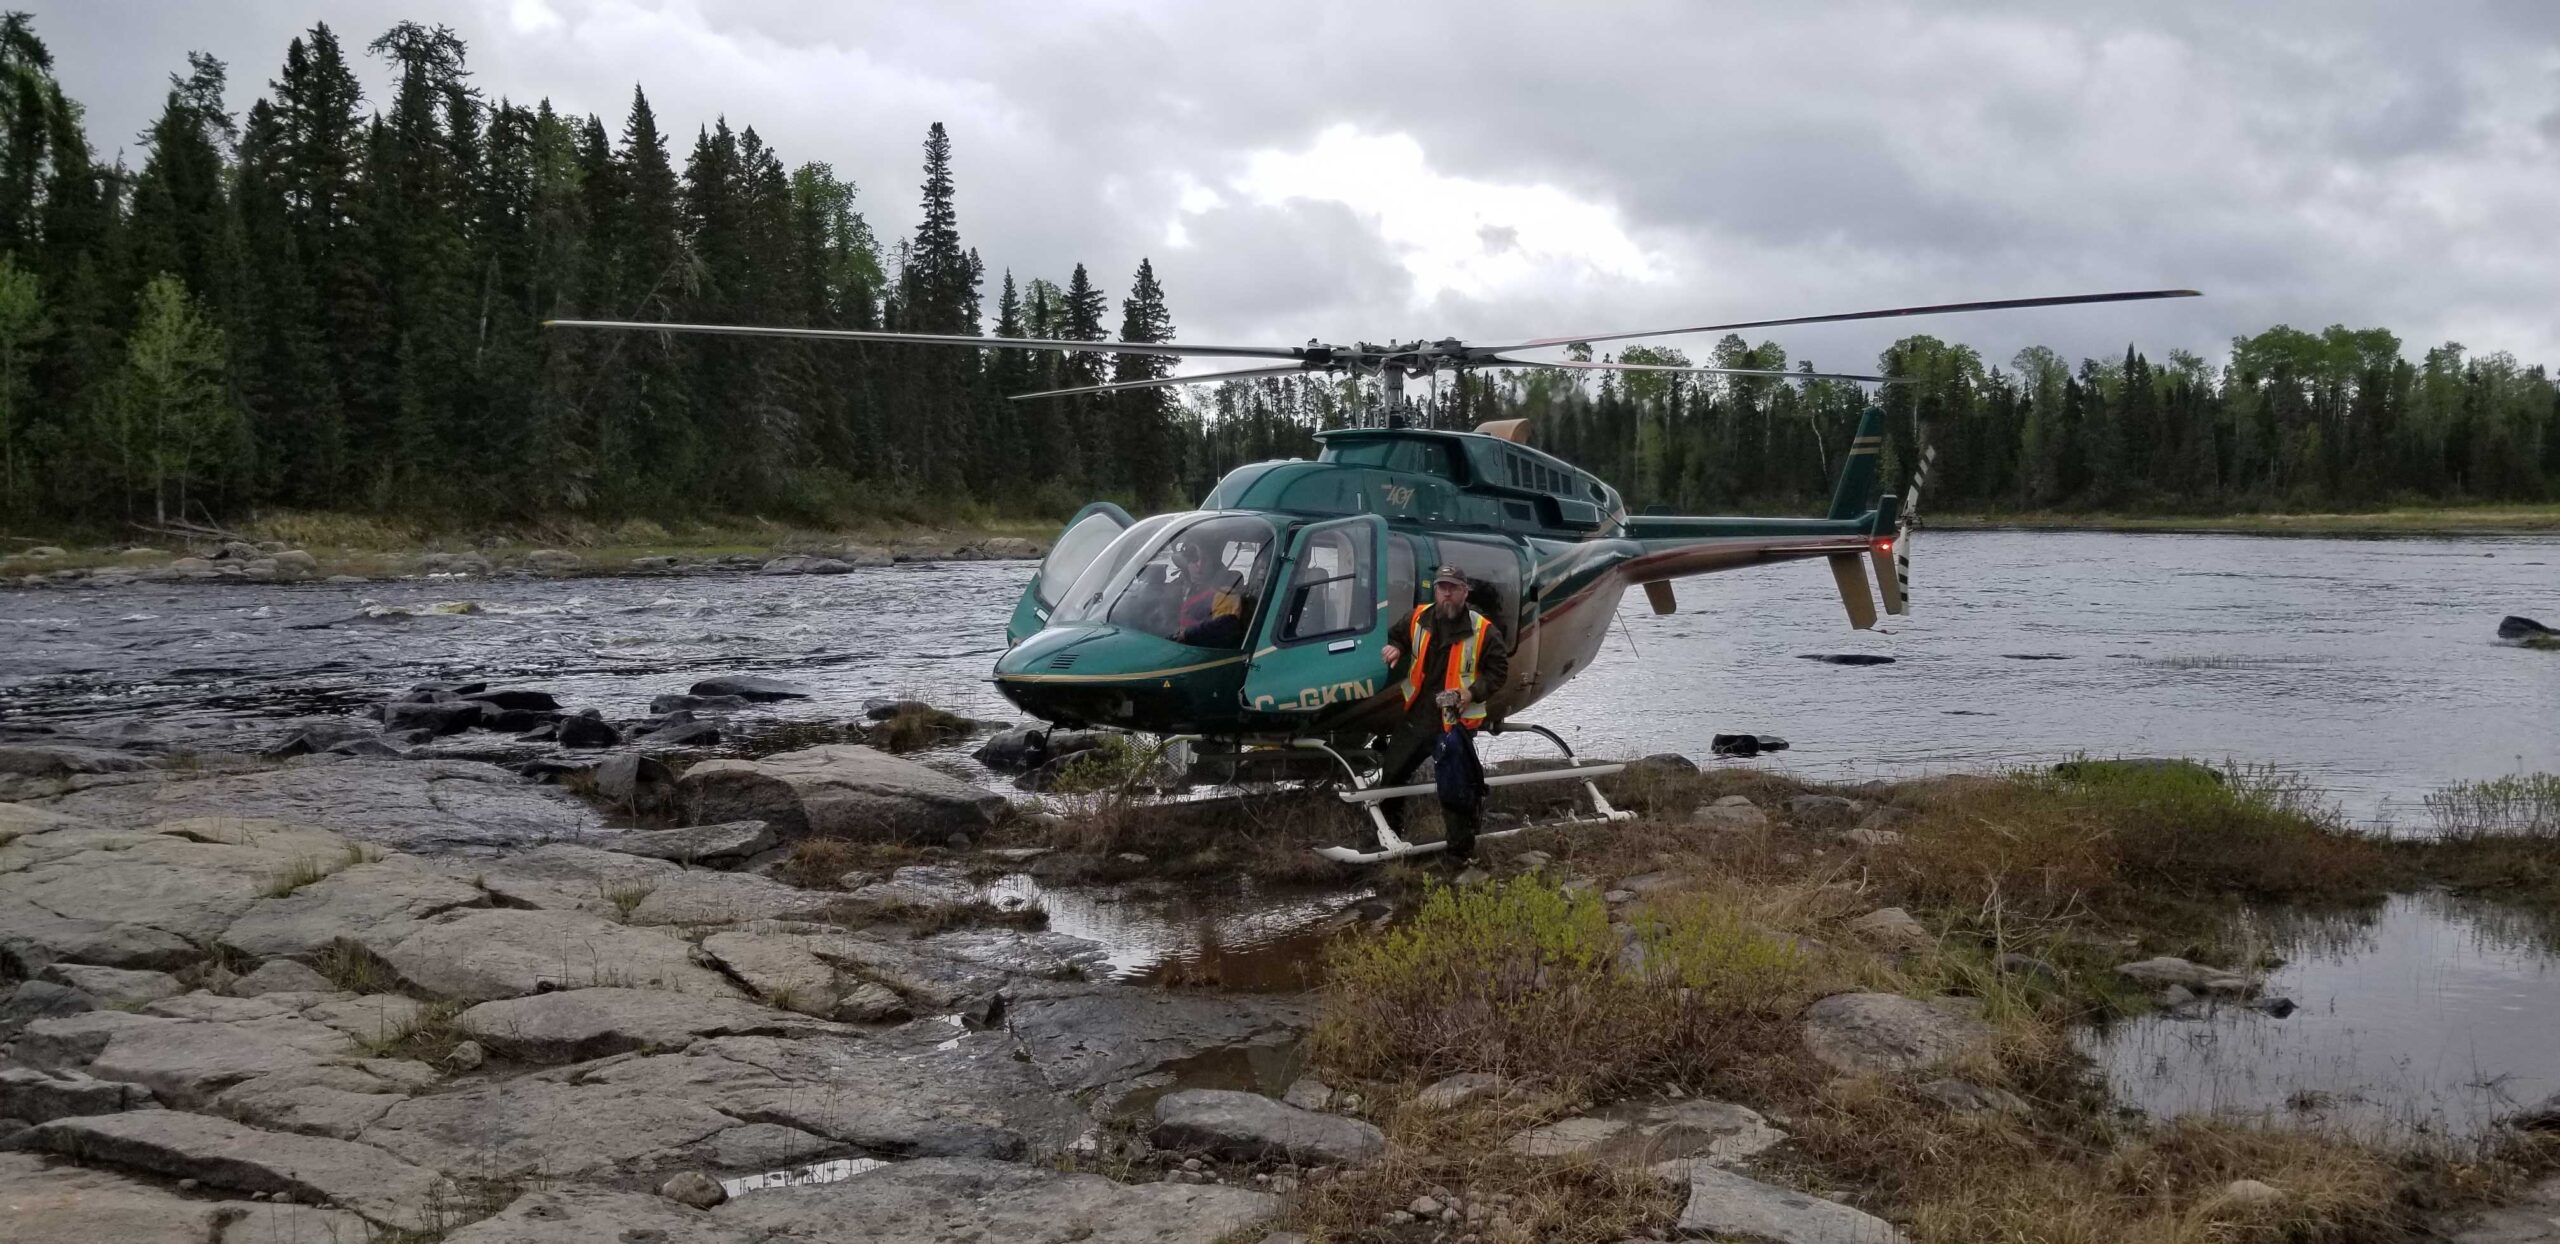 A parked helicopter in Marten Falls with Field Studies personnel exiting the aircraft.